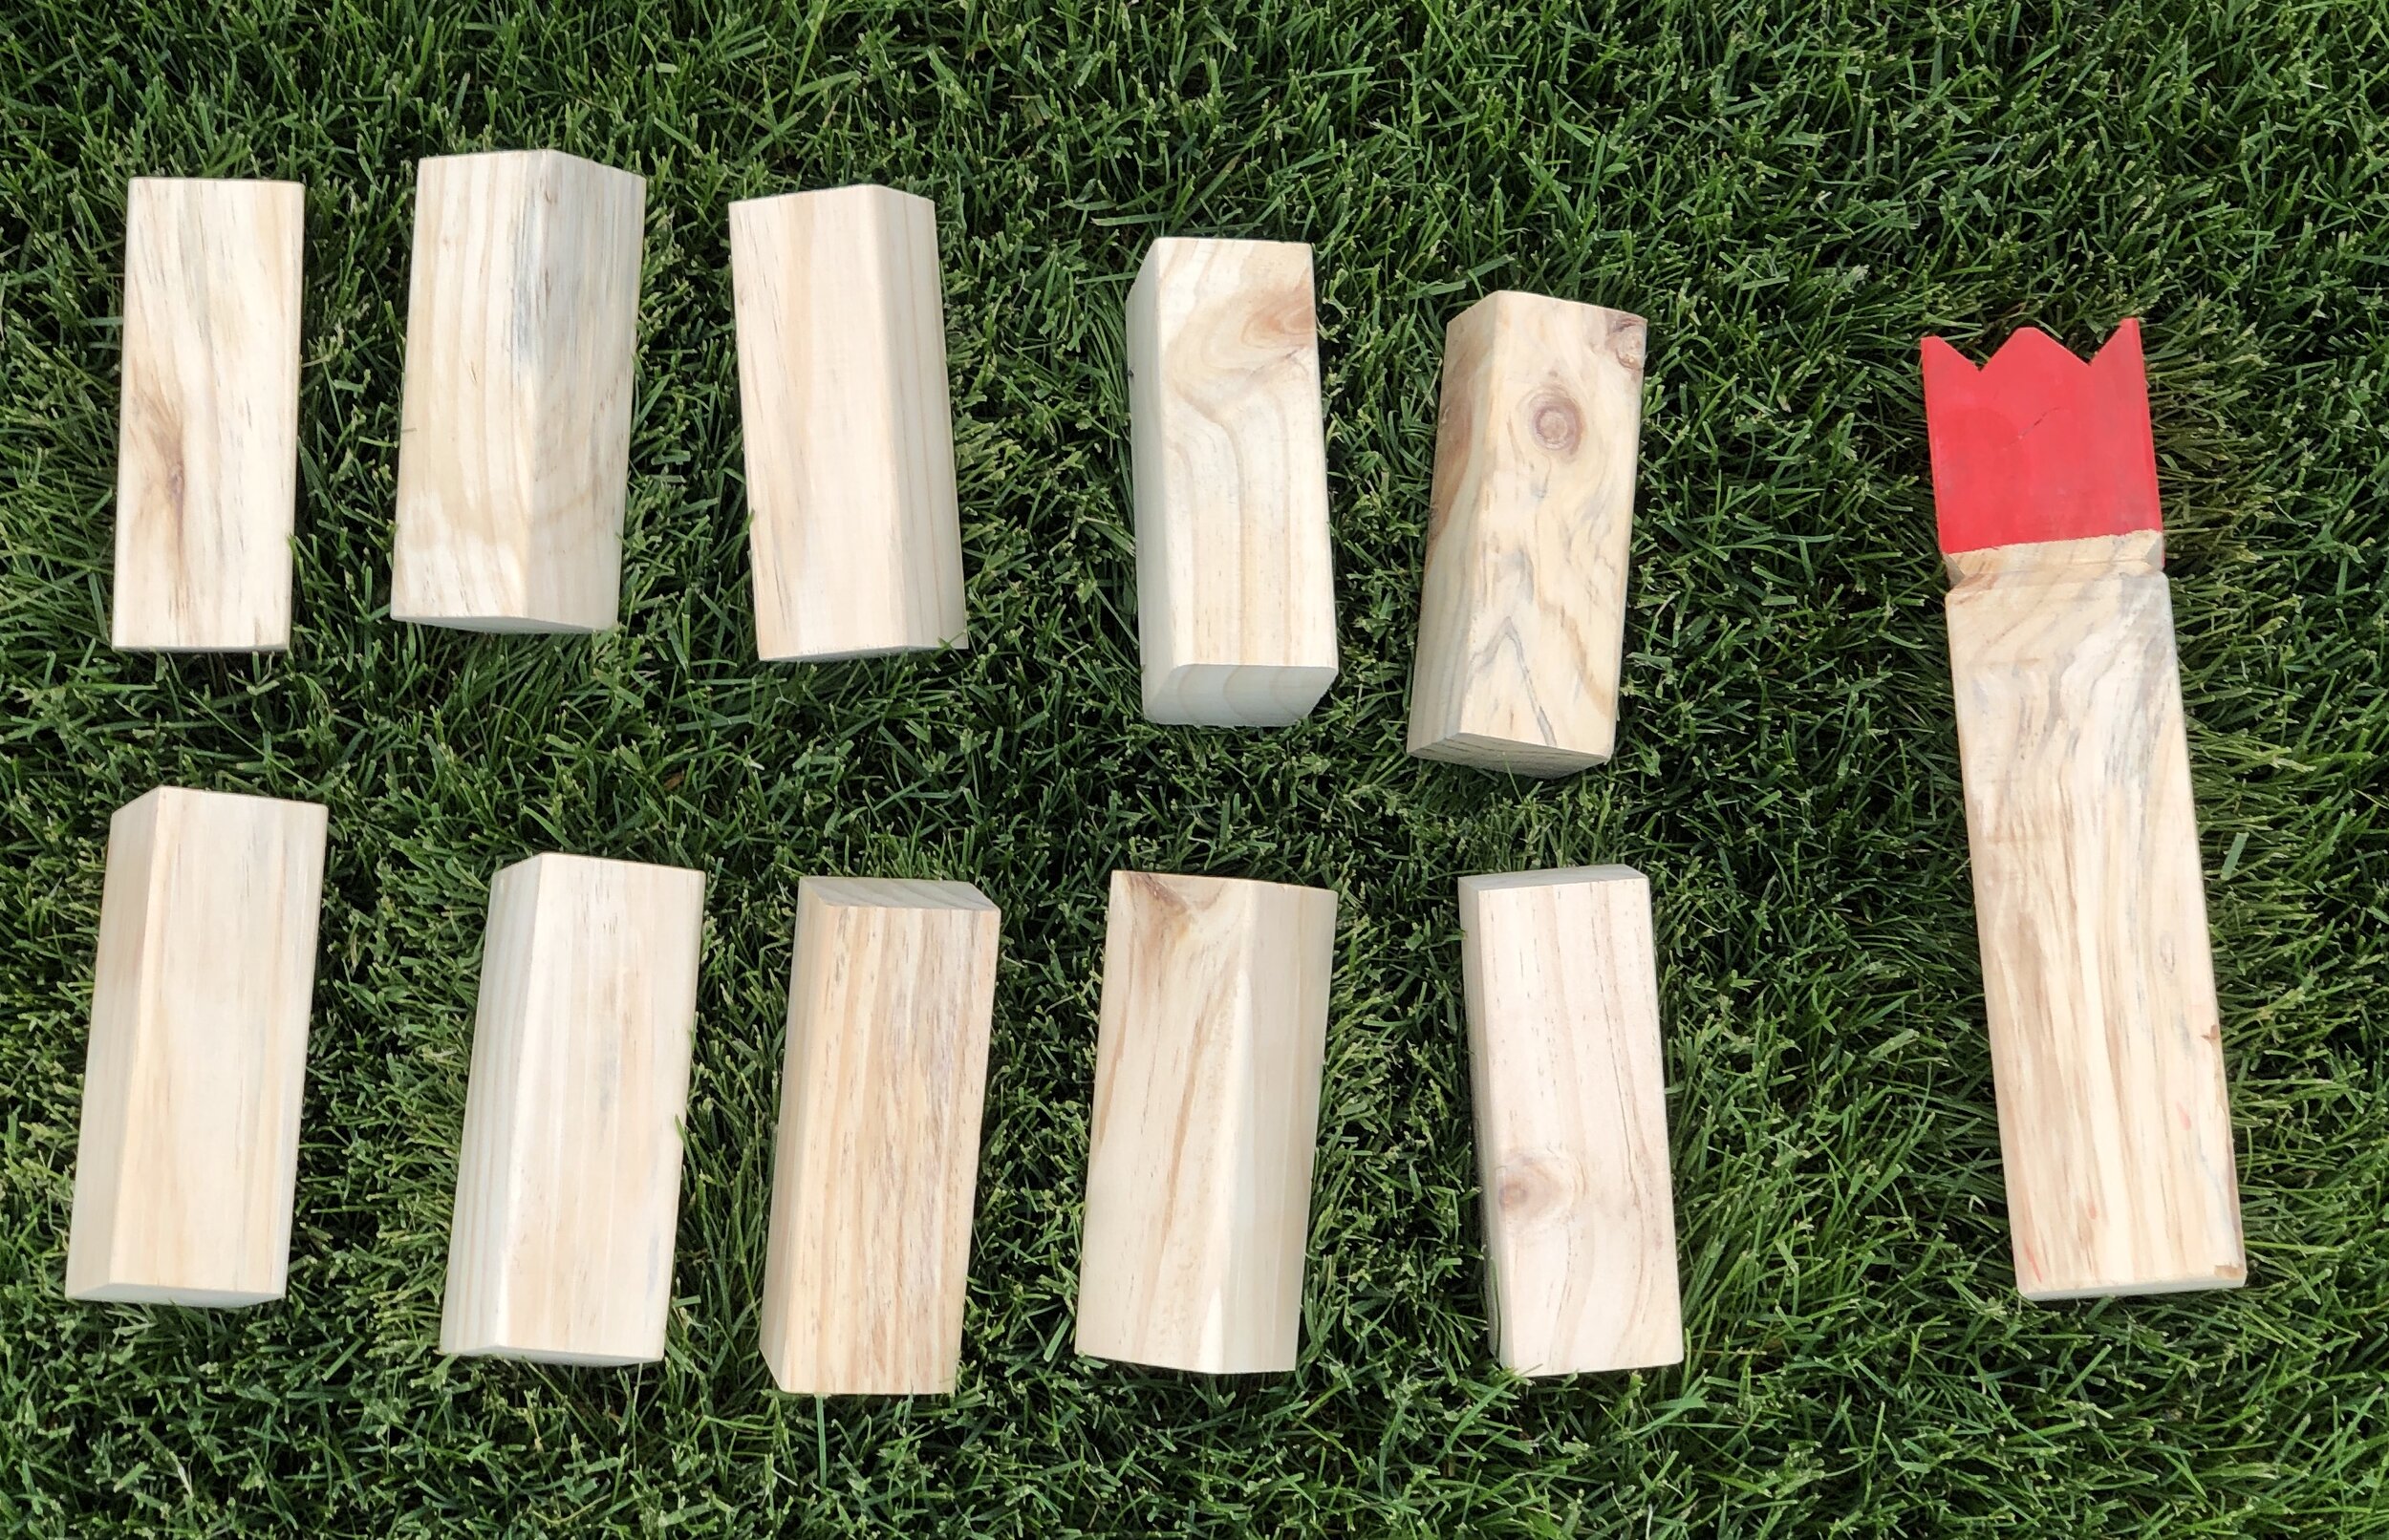 Yard Games Kubb Premium Size Outdoor Tossing Game with Carrying Case,  Instructions, and Boundary Markers